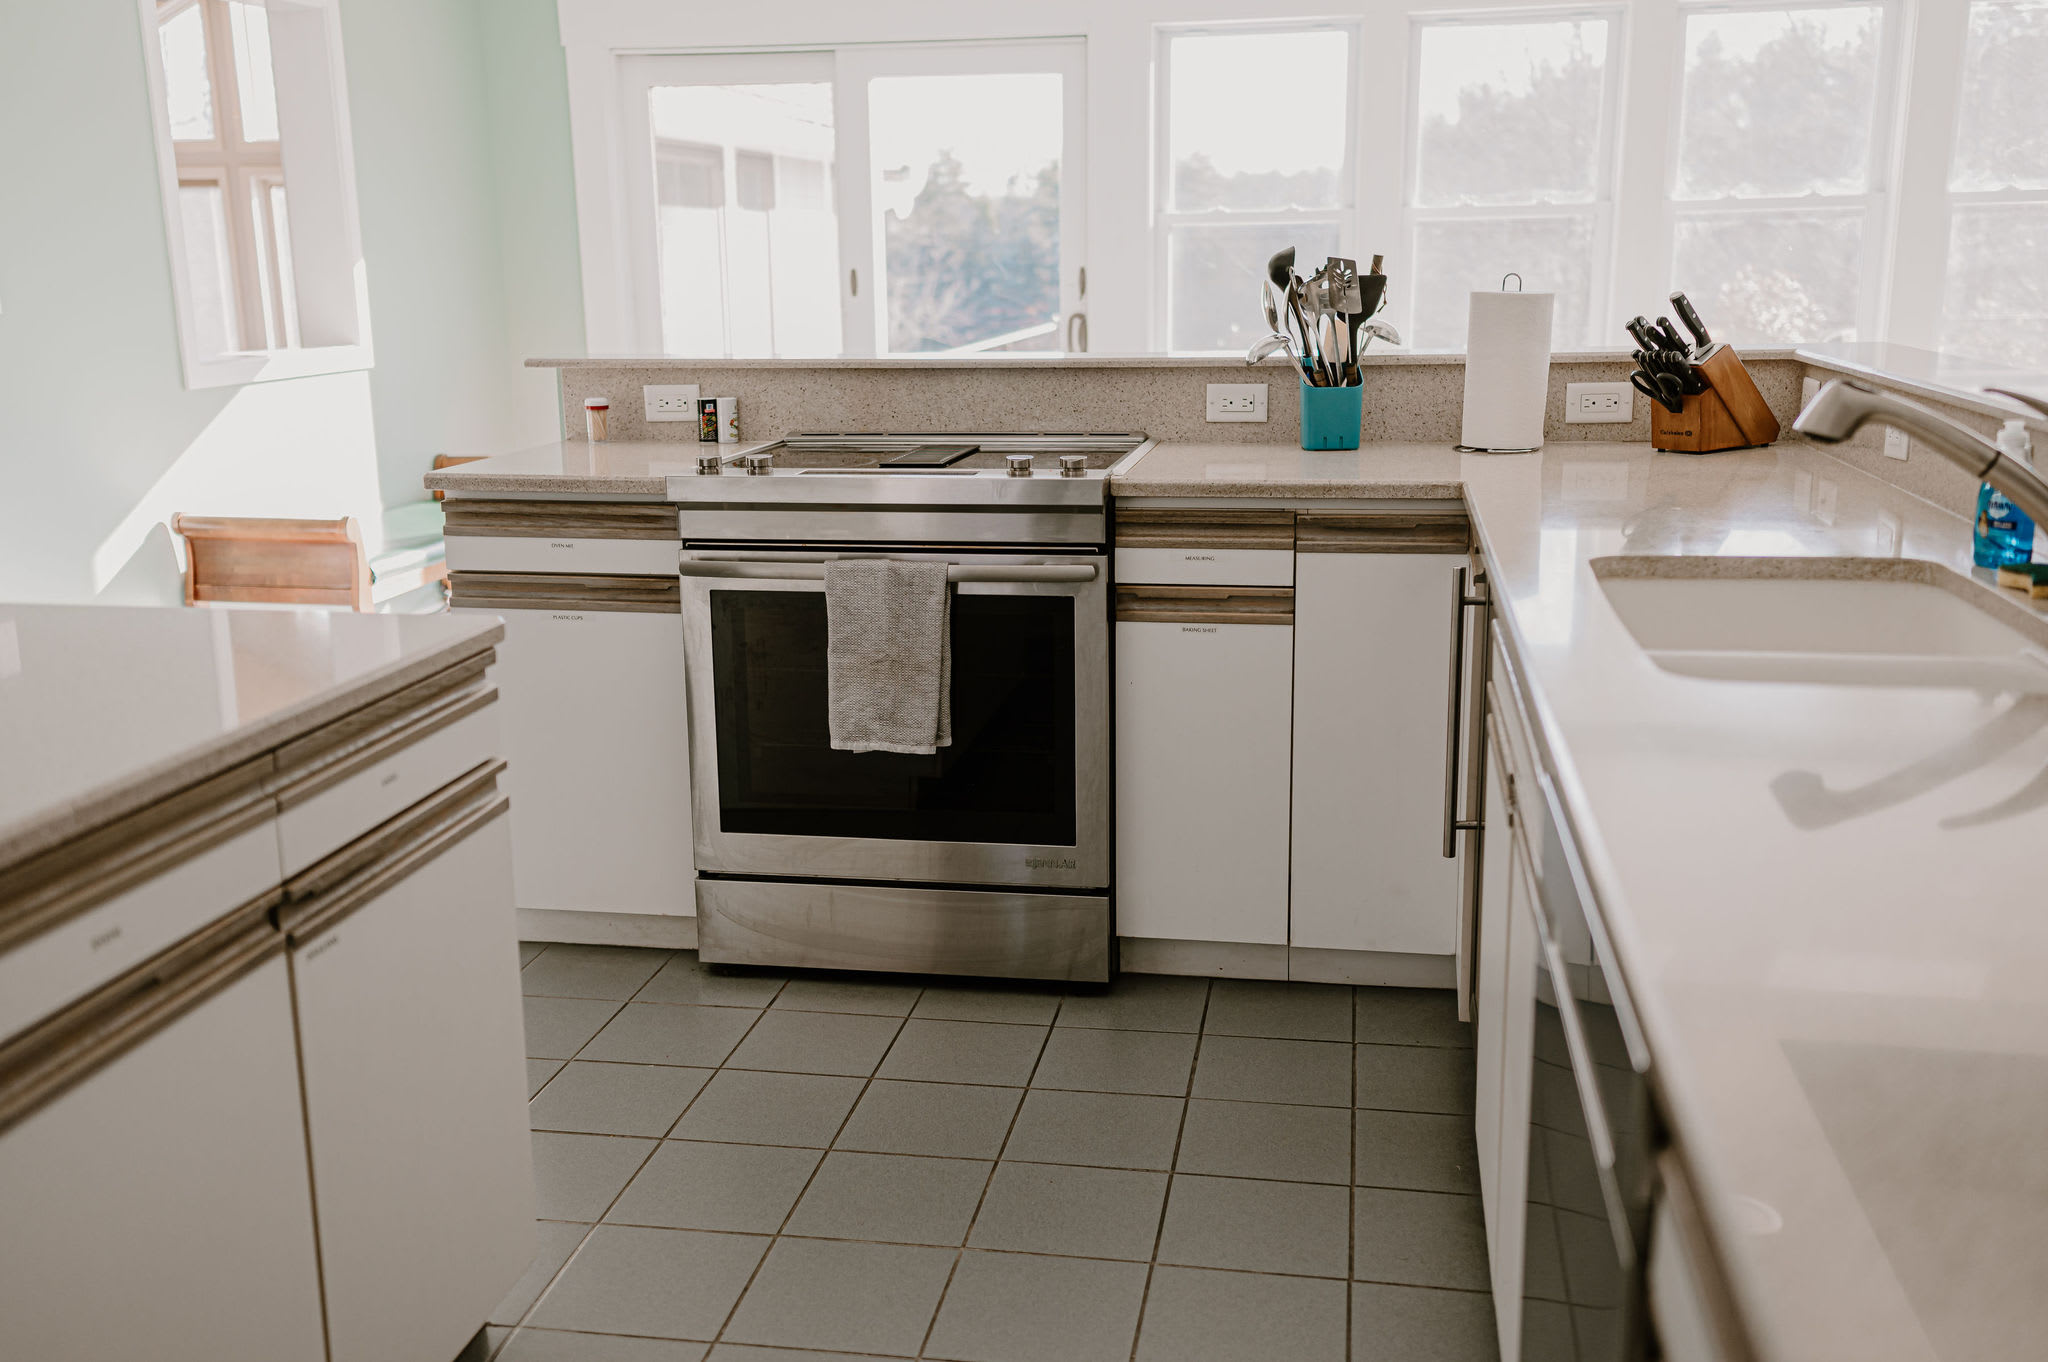 Fully equipped kitchen for your stay!